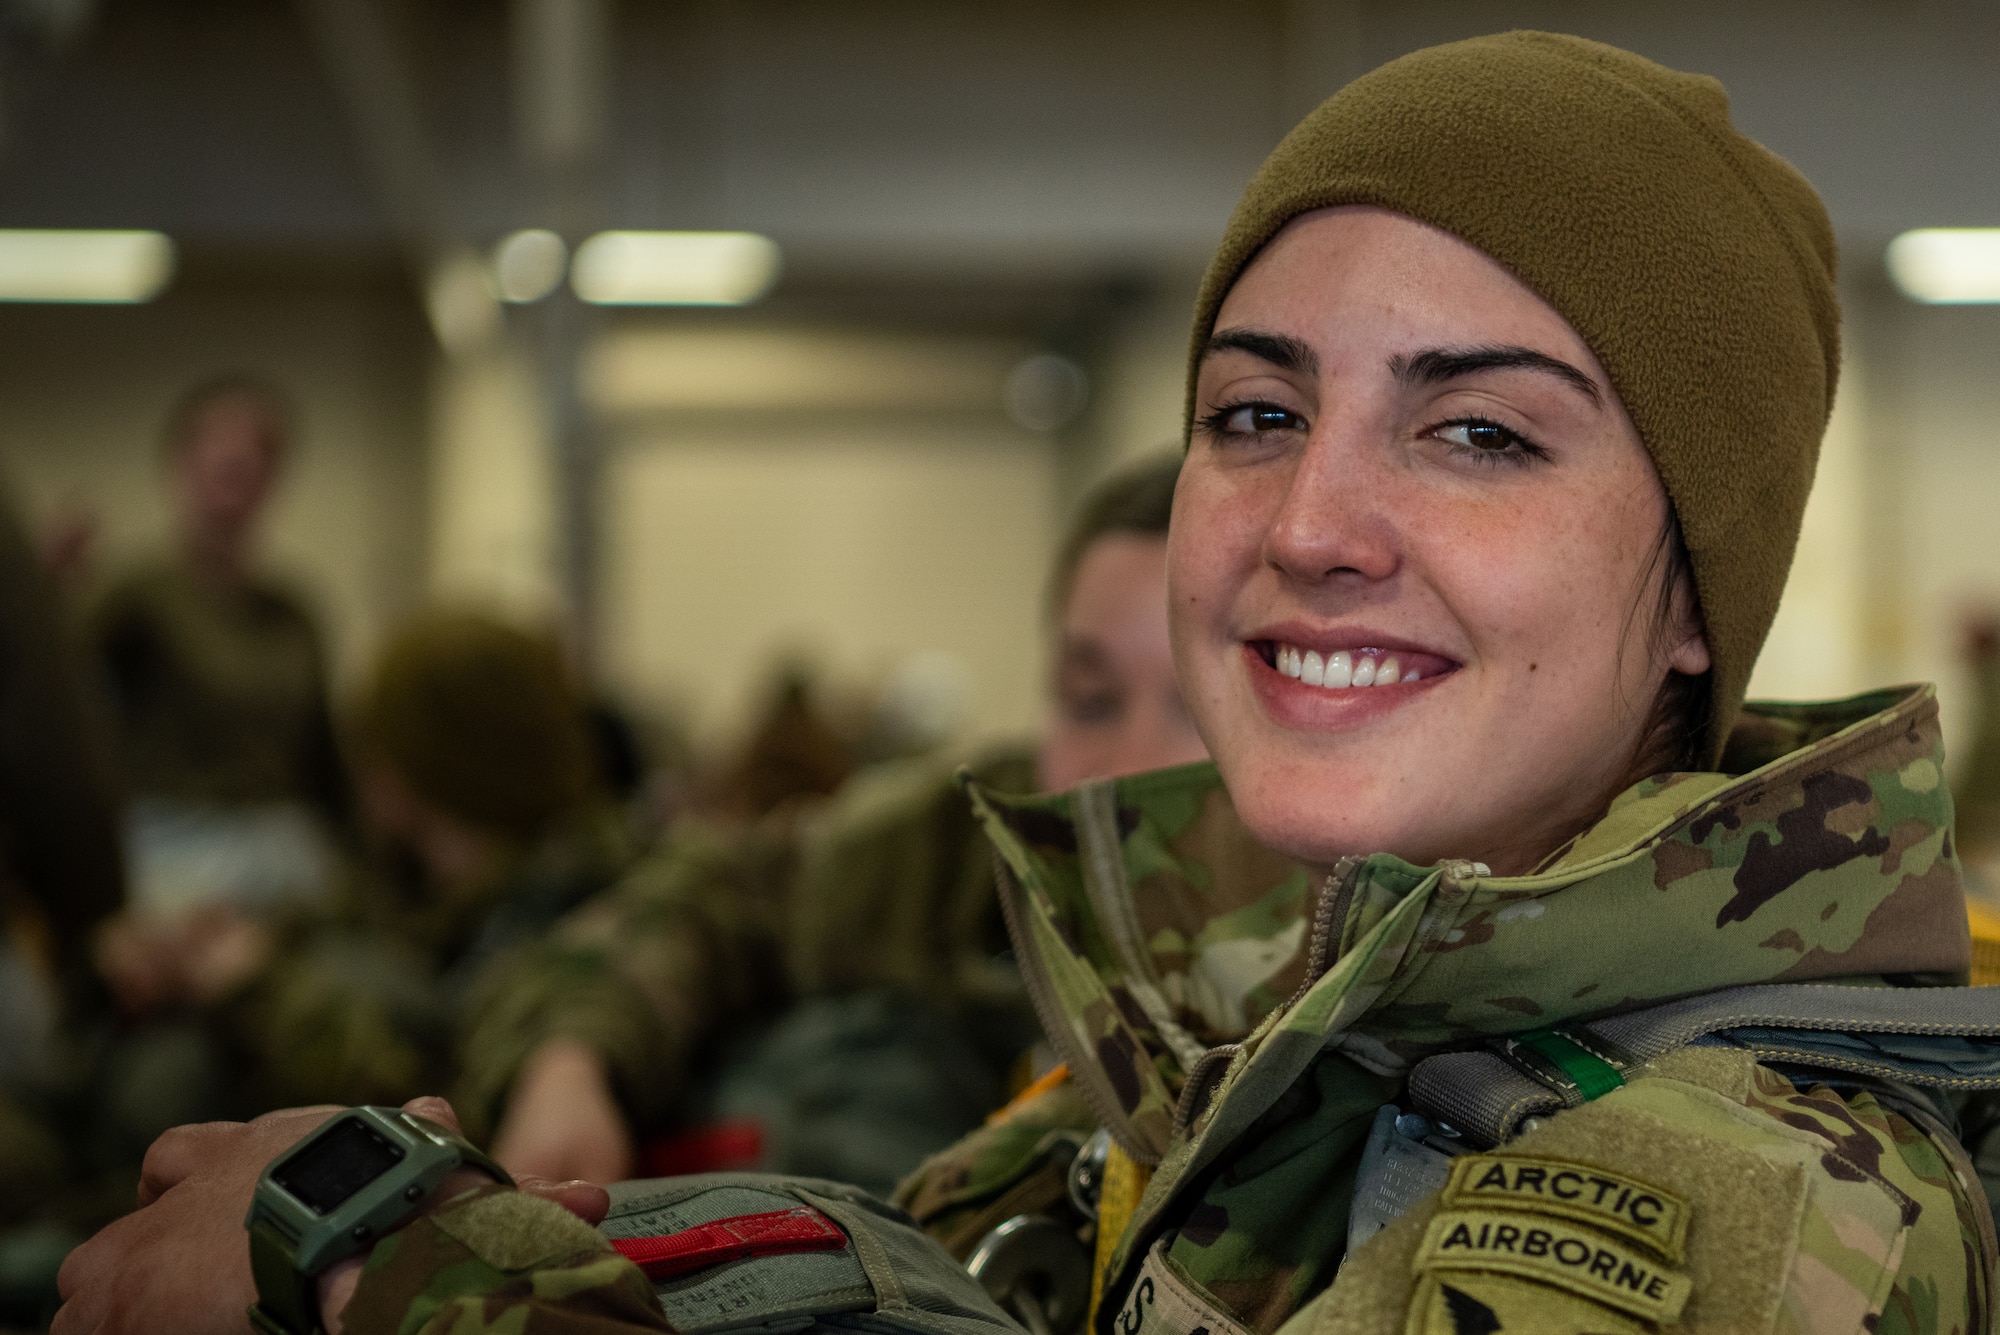 Every member of the operation including jumpers, jumpmasters and air crew were women, making it the first all-female airborne operation in division history.